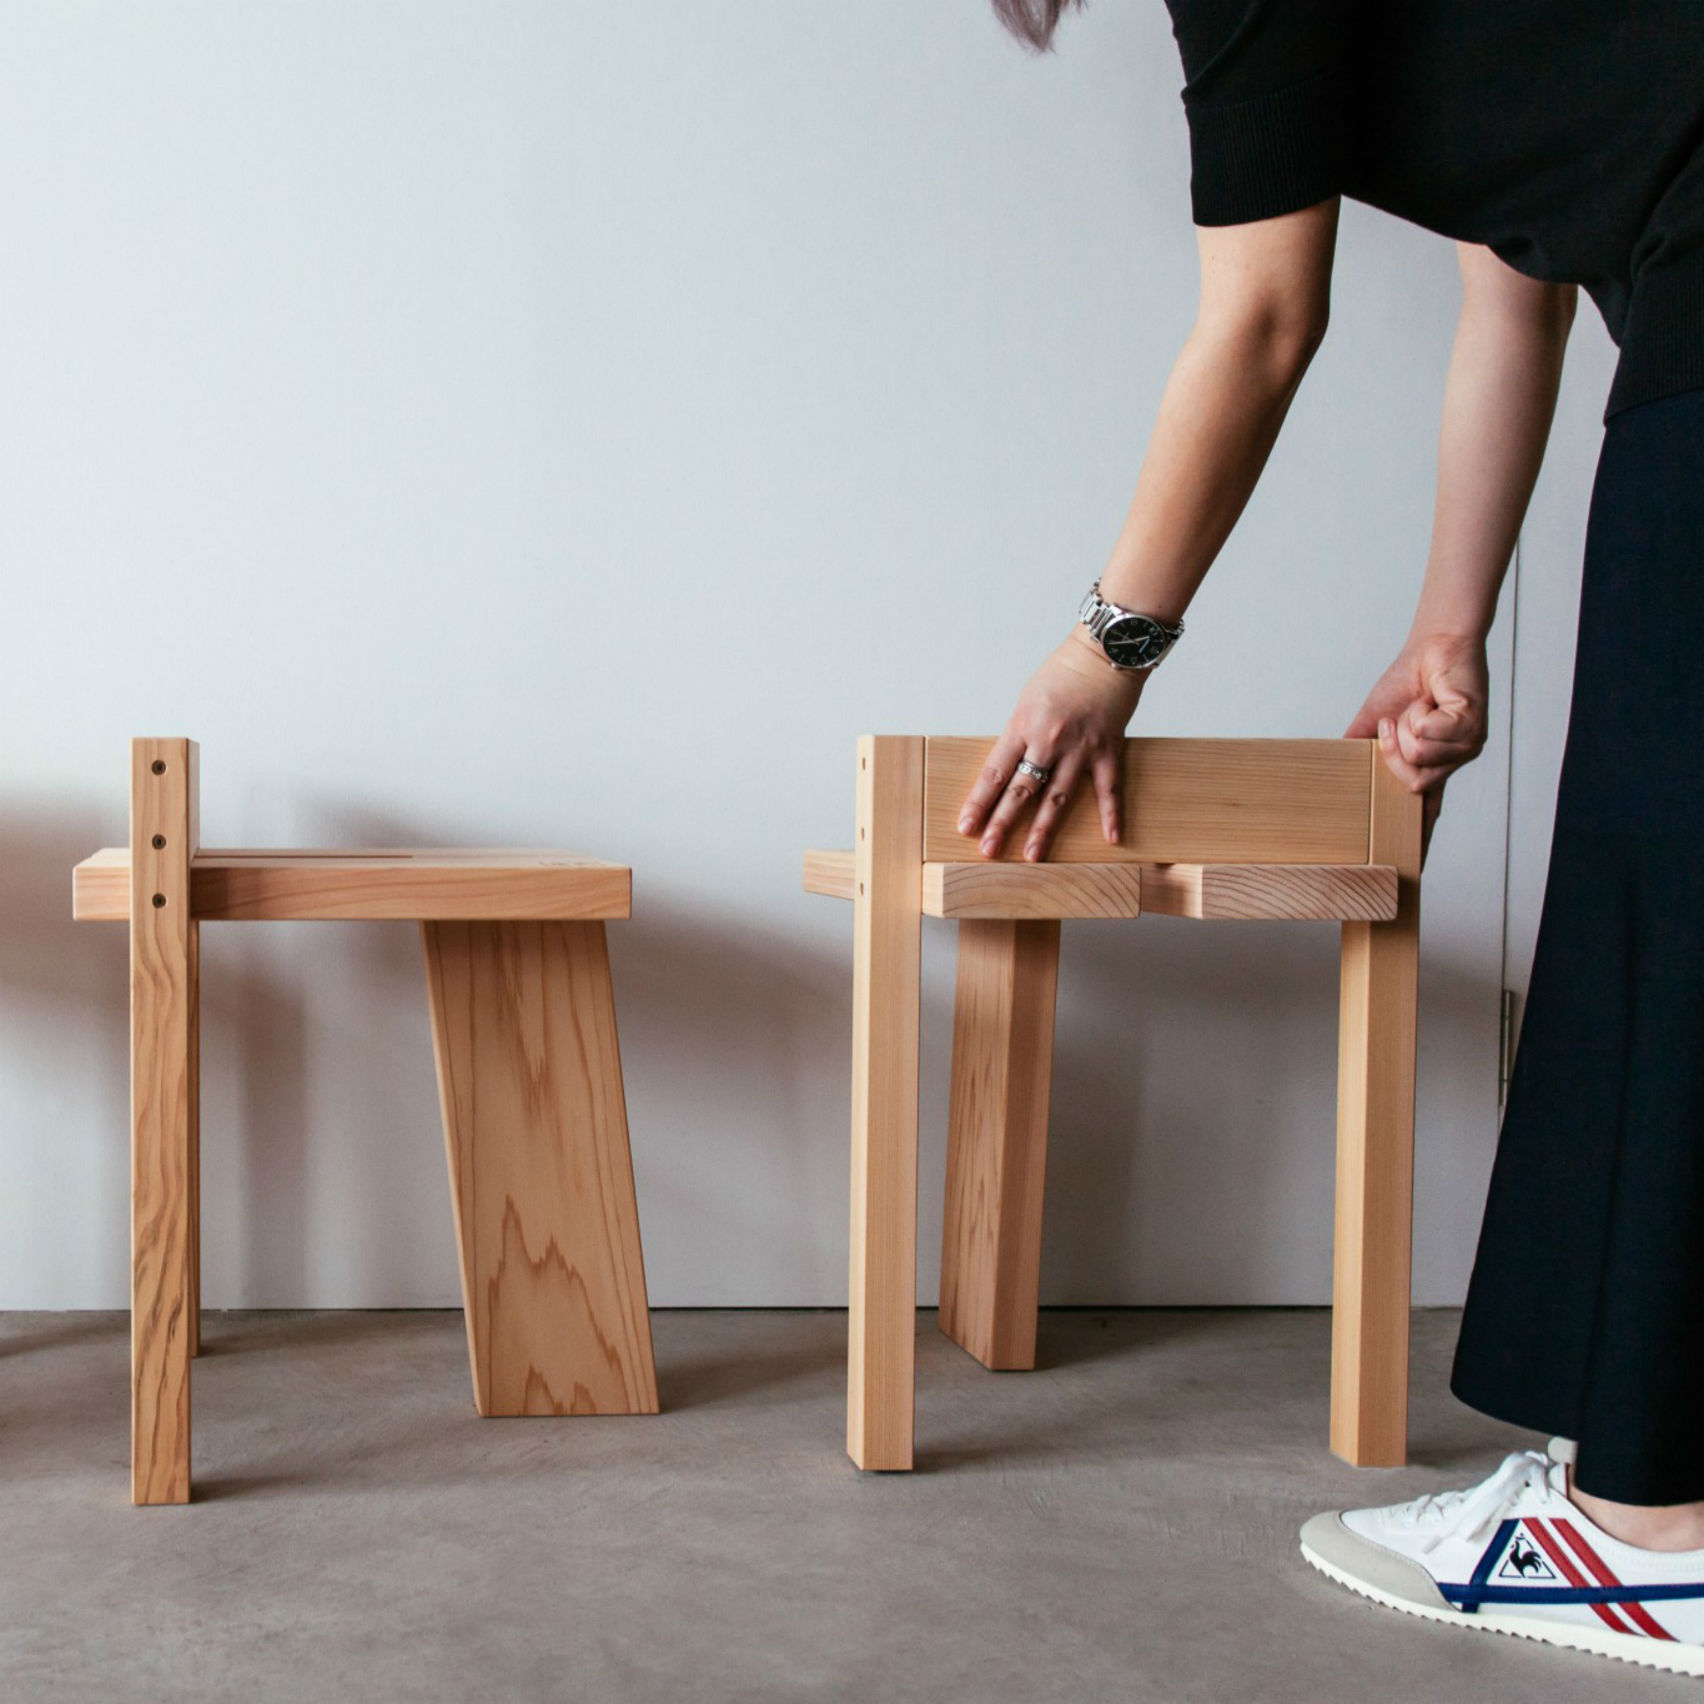 Tripodal stool, which was longlisted in the furniture design category, was chosen by readers